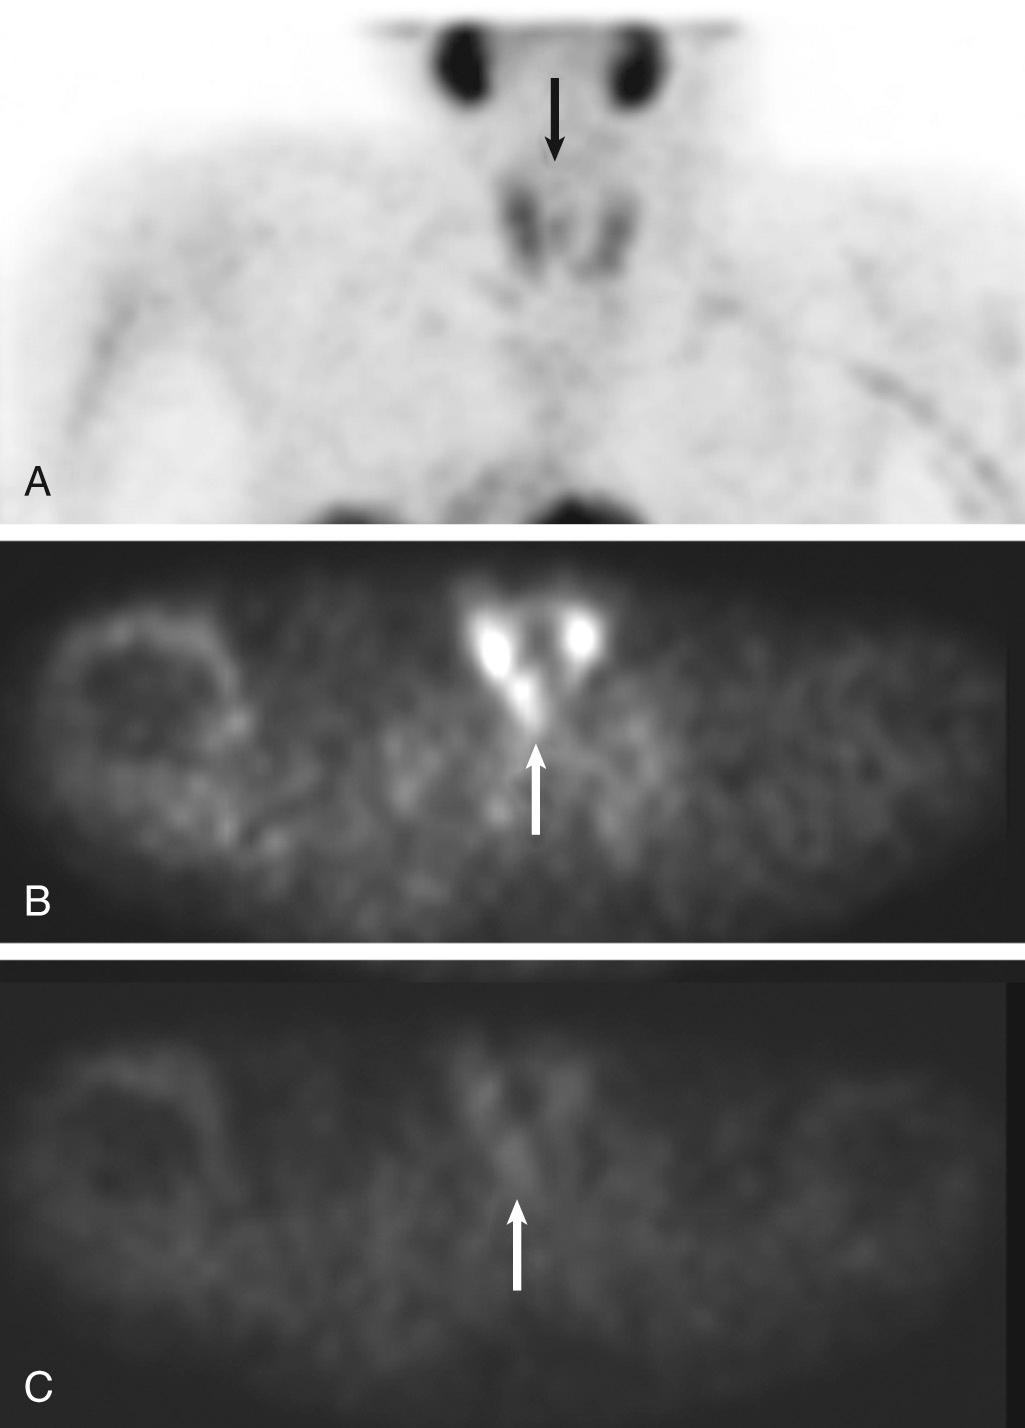 Fig. 8.9, (A) Planar early image from a technetinum-99m sestamibi scintigraphy in a patient with suspected parathyroid adenoma shows a small region of uptake between the thyroid lobes (arrow) . Note physiologic uptake in the submandibular and thyroid glands. (B) Early single-photon emission computed tomography (SPECT) image localizes the uptake posterior to the thyroid glands in the paraesophageal region. (C) Delayed SPECT images show the expected washout of radioactivity from the thyroid glands, whereas the paraesophageal lesion retains radionuclide, consistent with parathyroid adenoma.